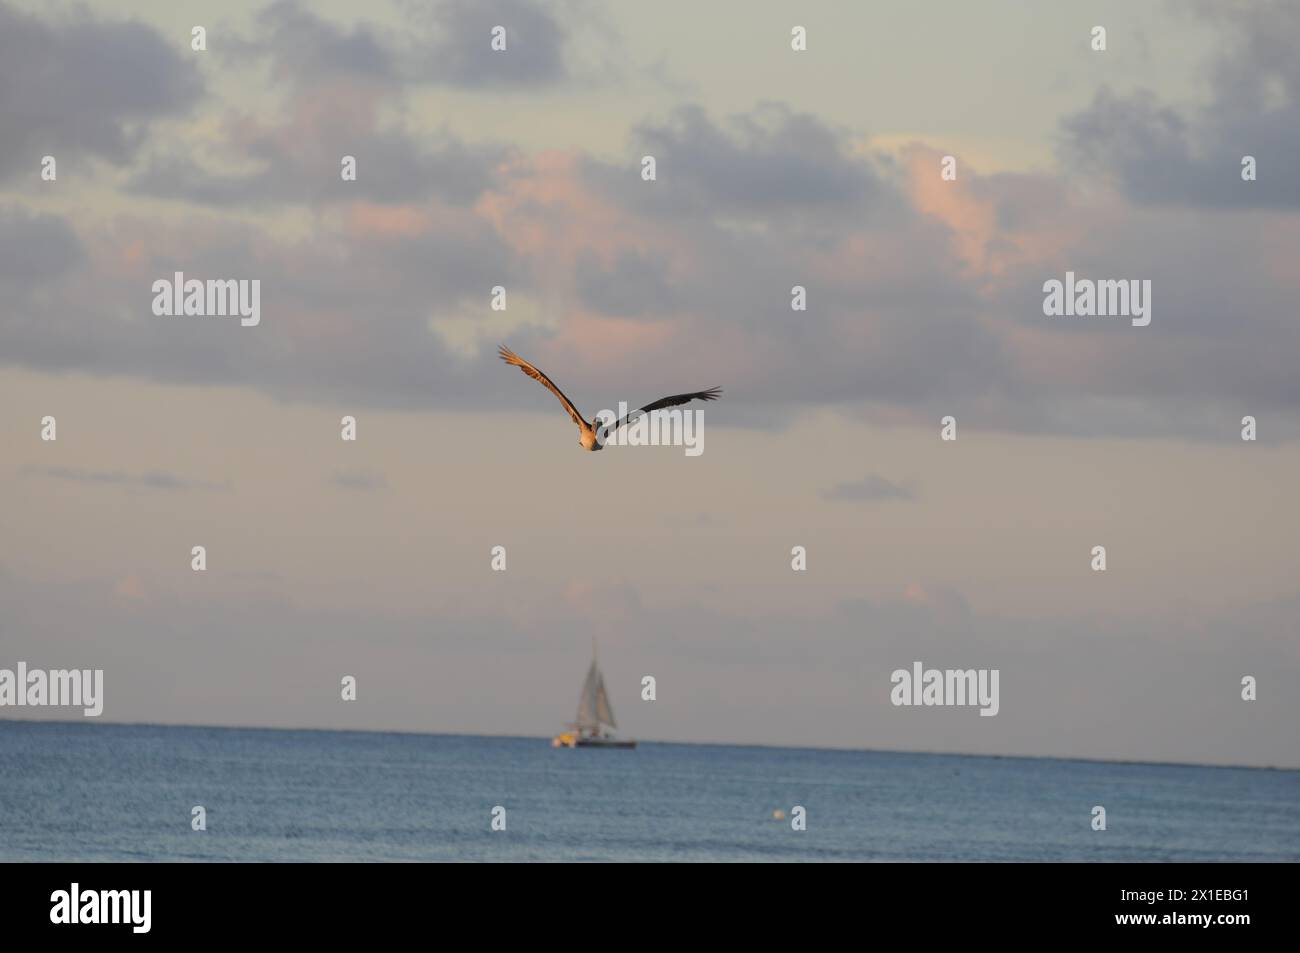 A bird is flying over the ocean with a sailboat in the background. The sky is cloudy and the water is calm Stock Photo